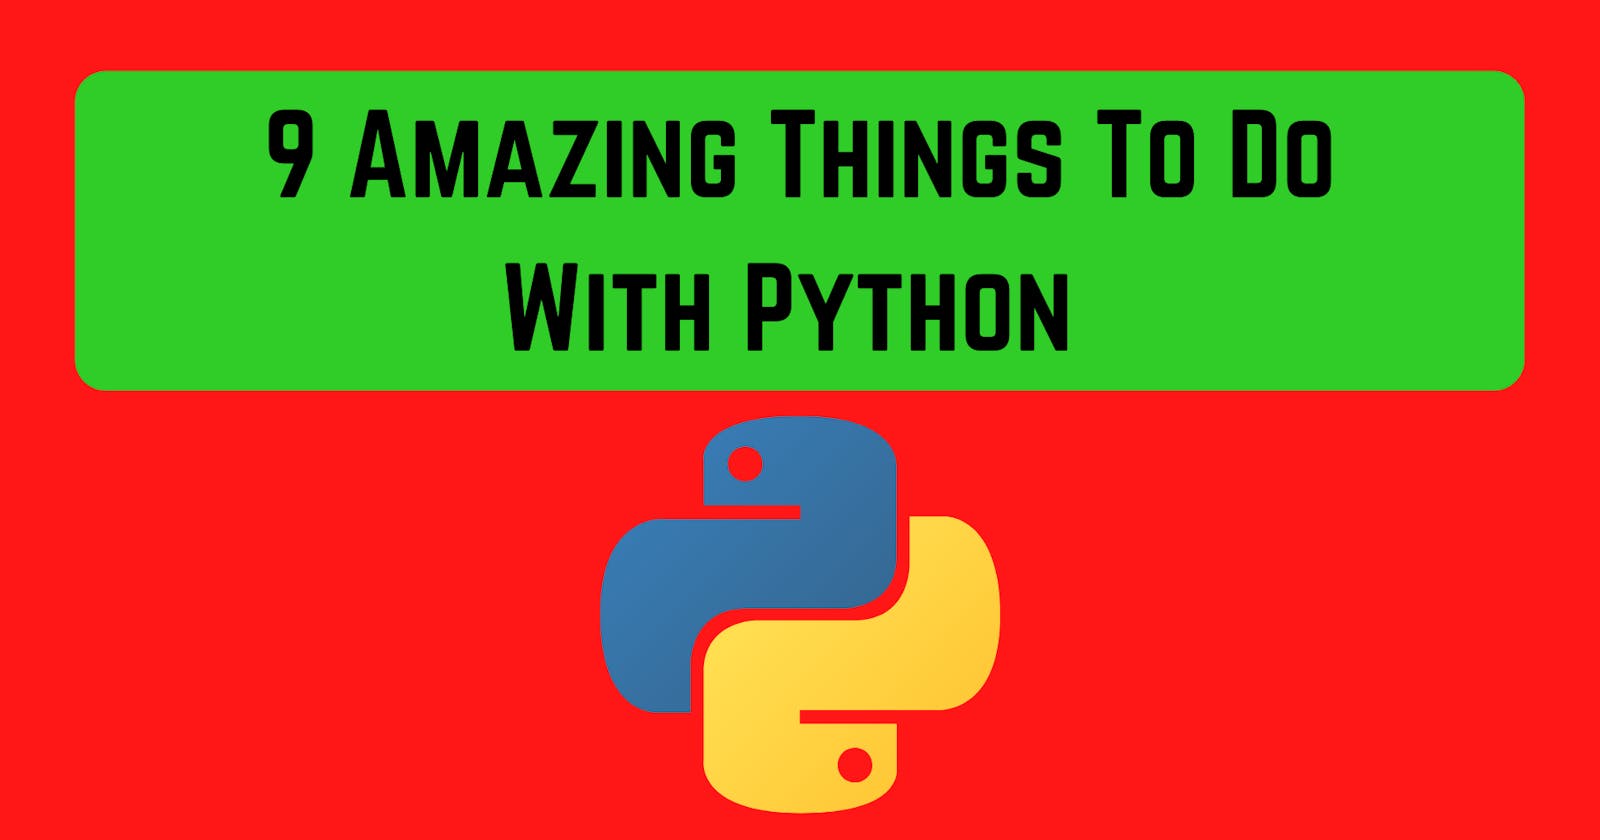 9 Amazing Things To Do With Python